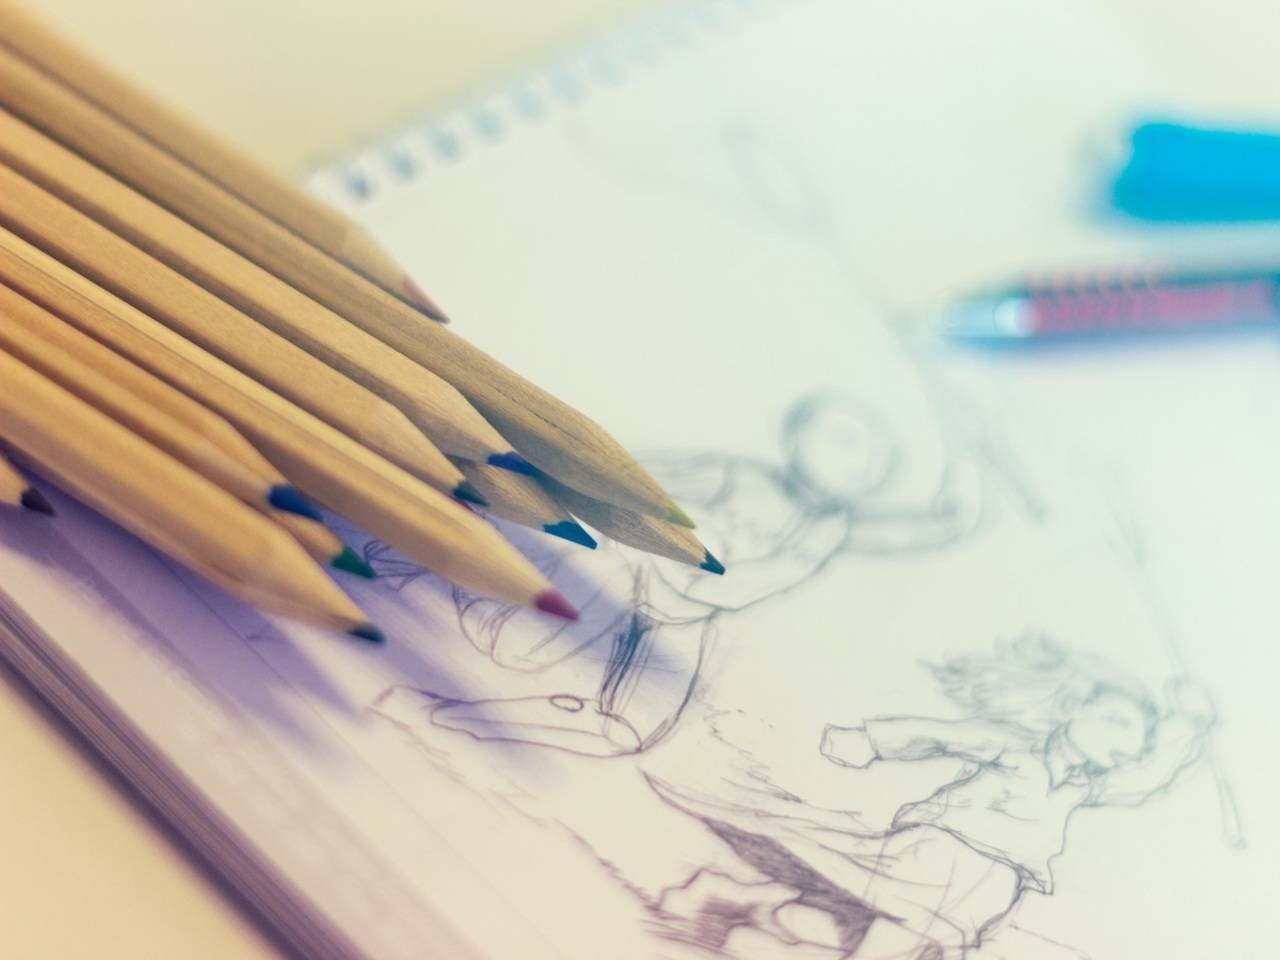 17 Drawing Techniques to Draw and Sketch like a Pro